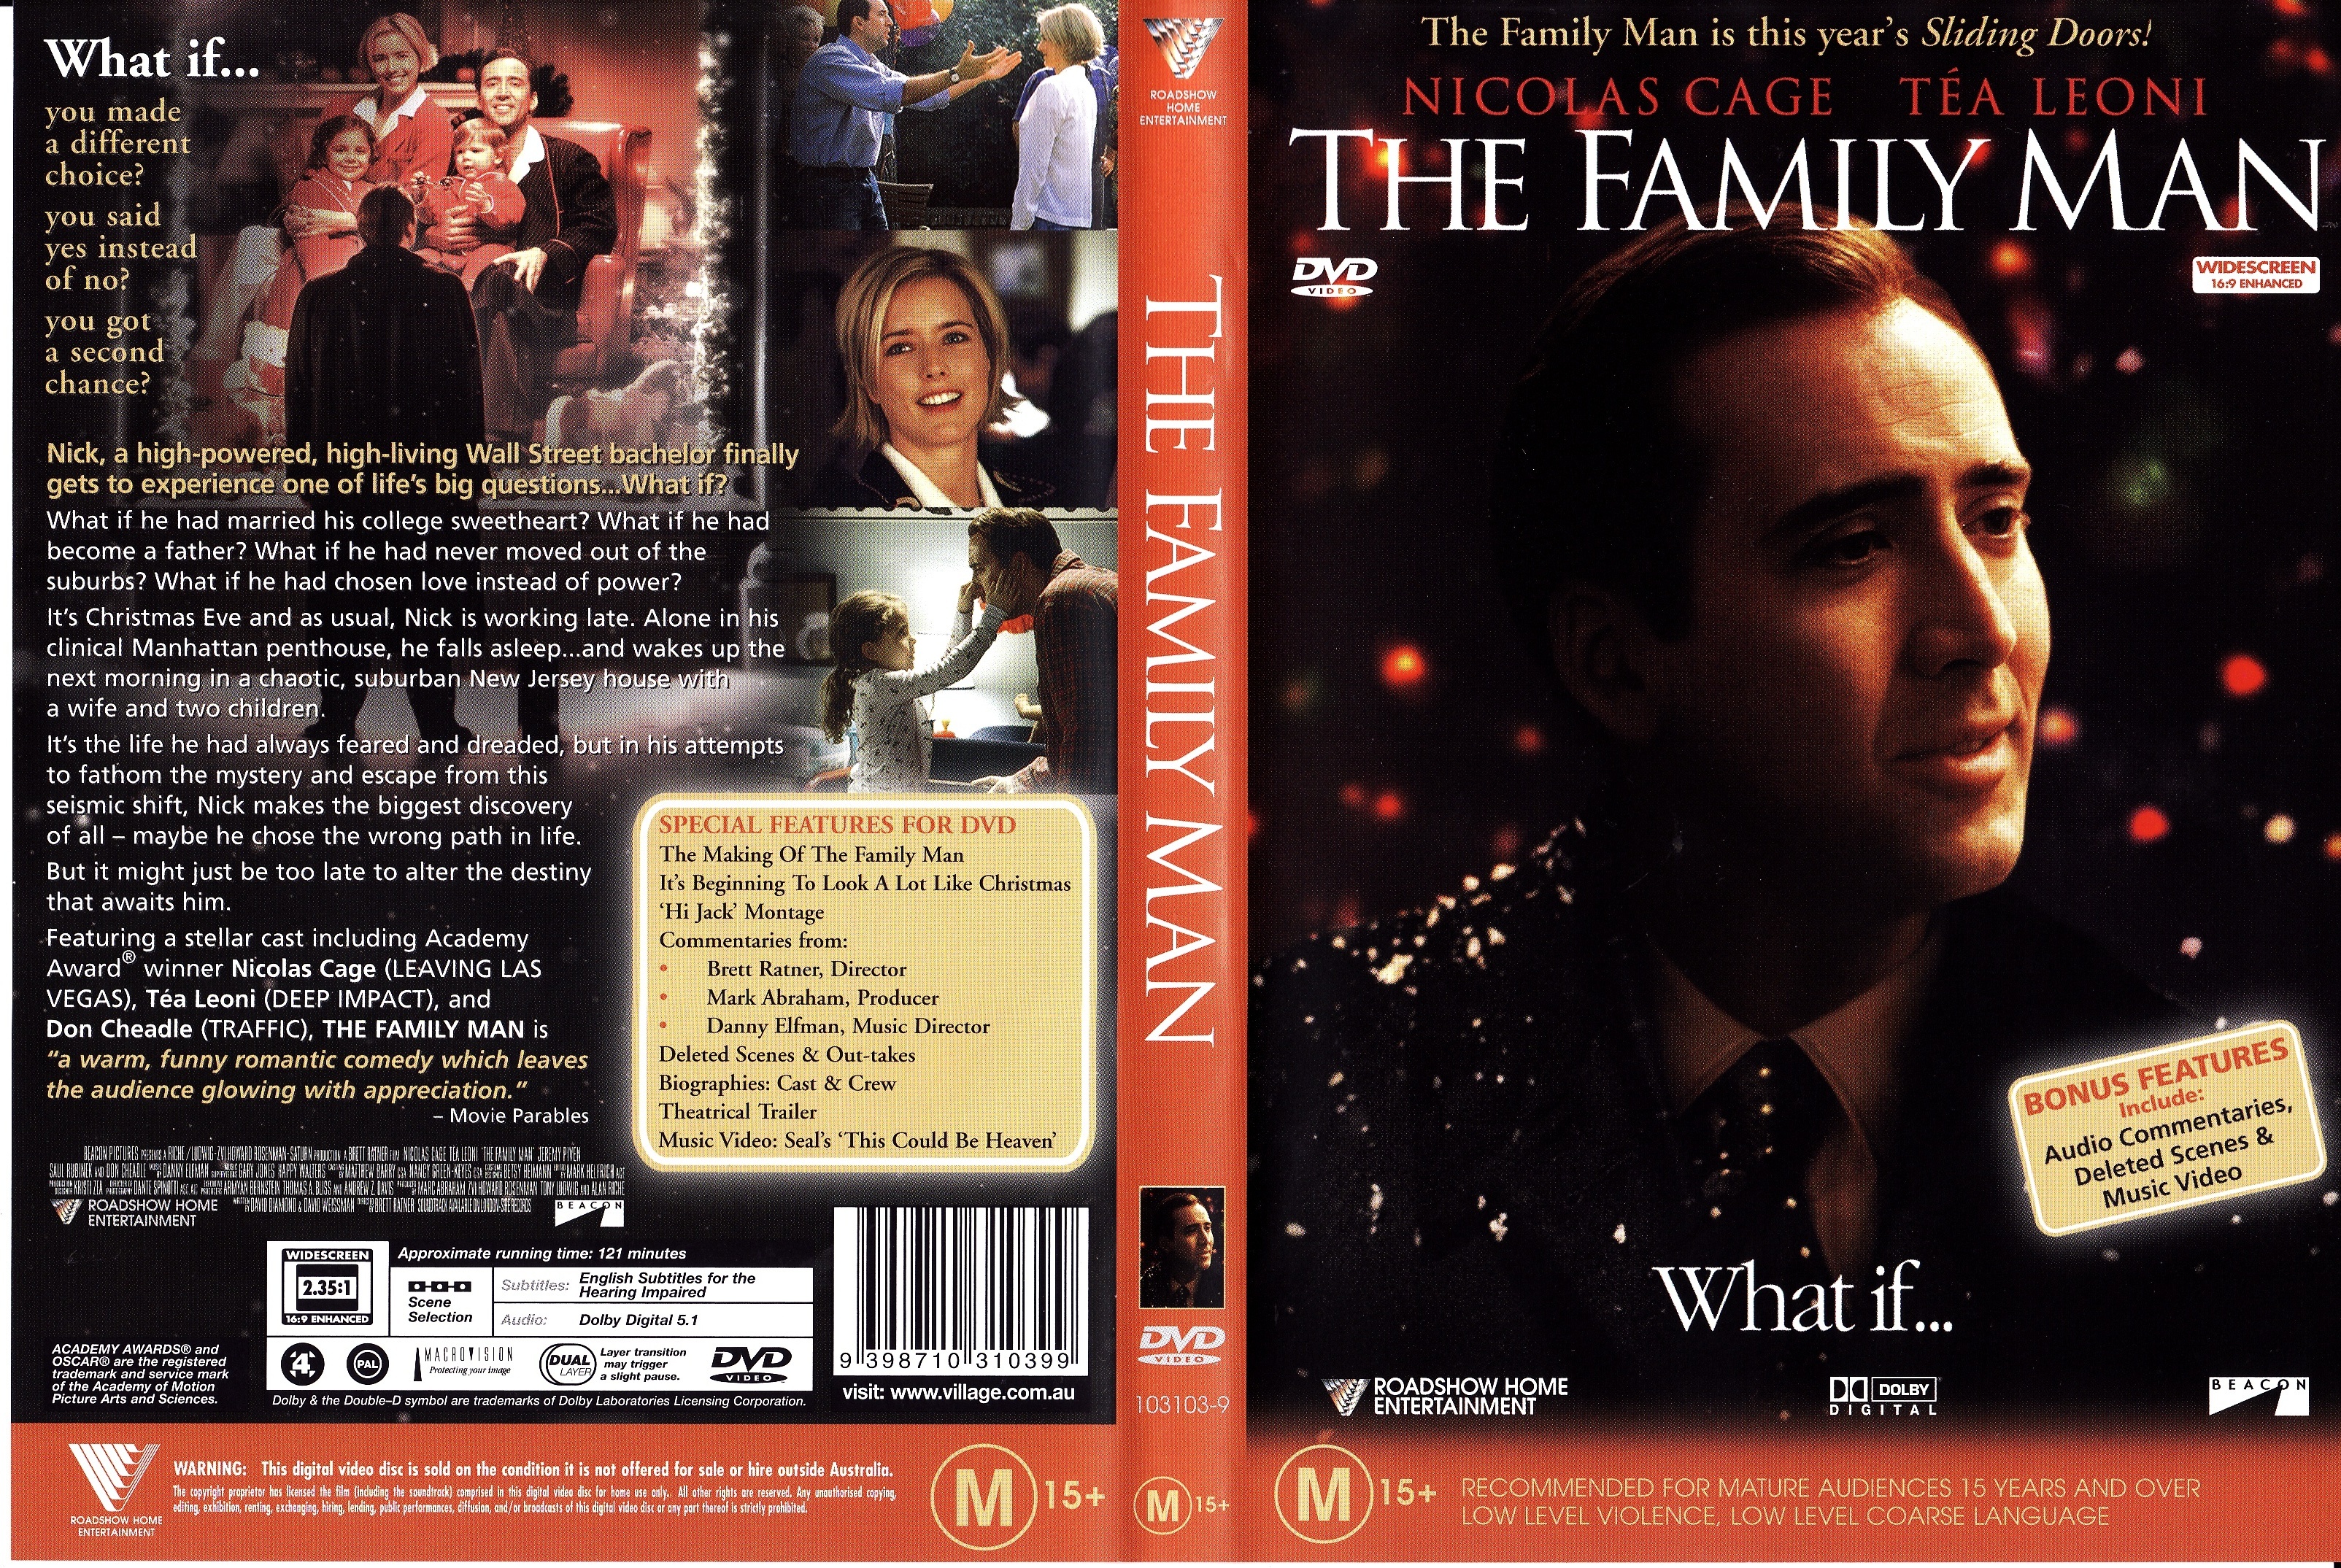 The Family Man box cover